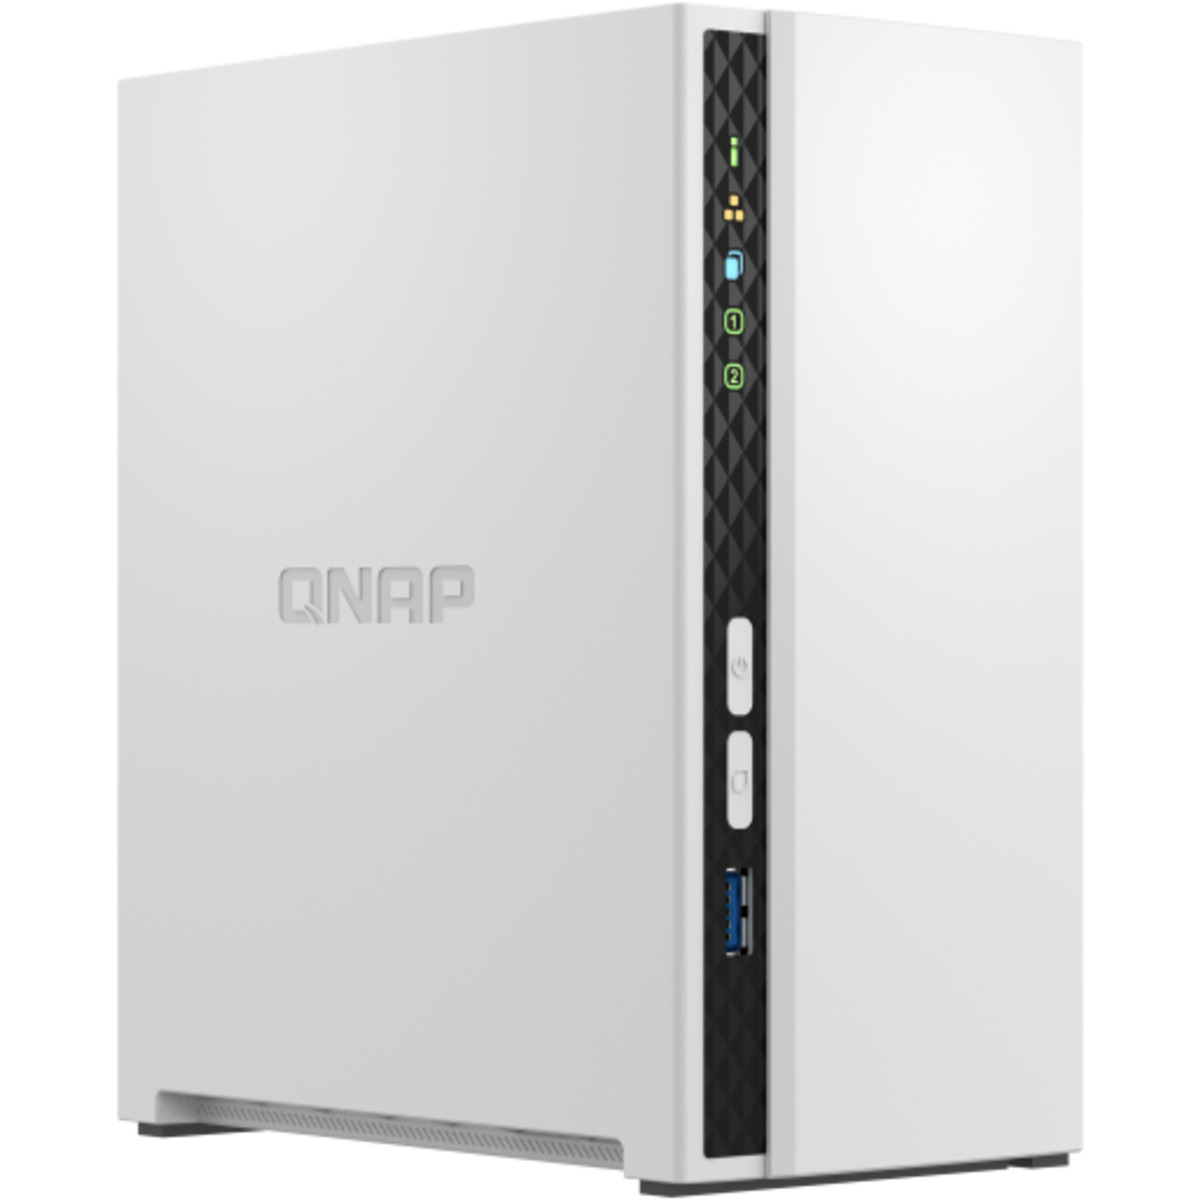 QNAP TS-233 4tb 2-Bay Desktop Personal / Basic Home / Small Office NAS - Network Attached Storage Device 1x4tb Seagate IronWolf Pro ST4000NT001 3.5 7200rpm SATA 6Gb/s HDD NAS Class Drives Installed - Burn-In Tested TS-233